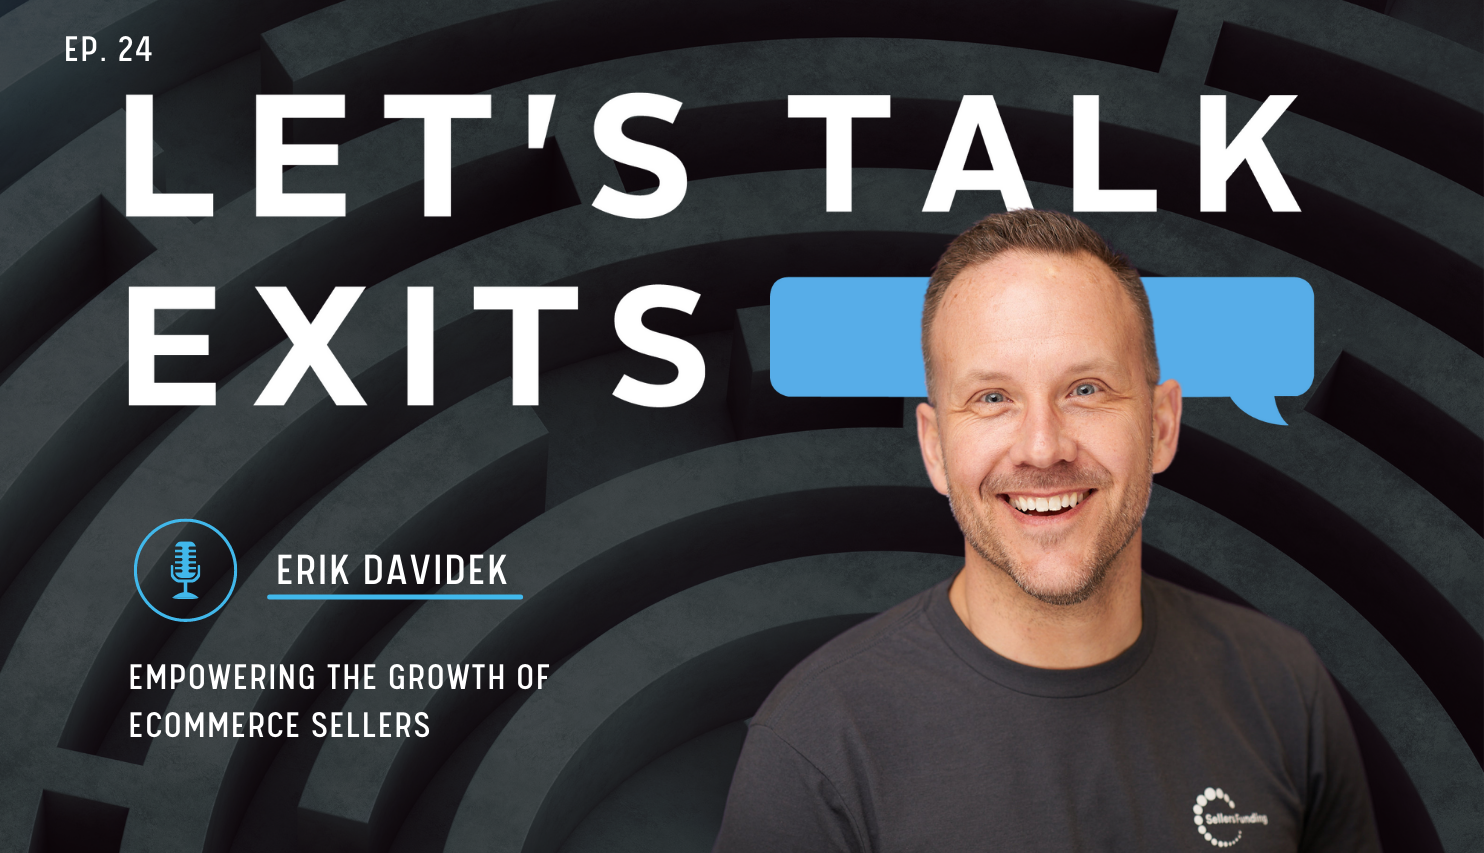 Empowering the Growth of eCommerce Sellers with Erik Davidek